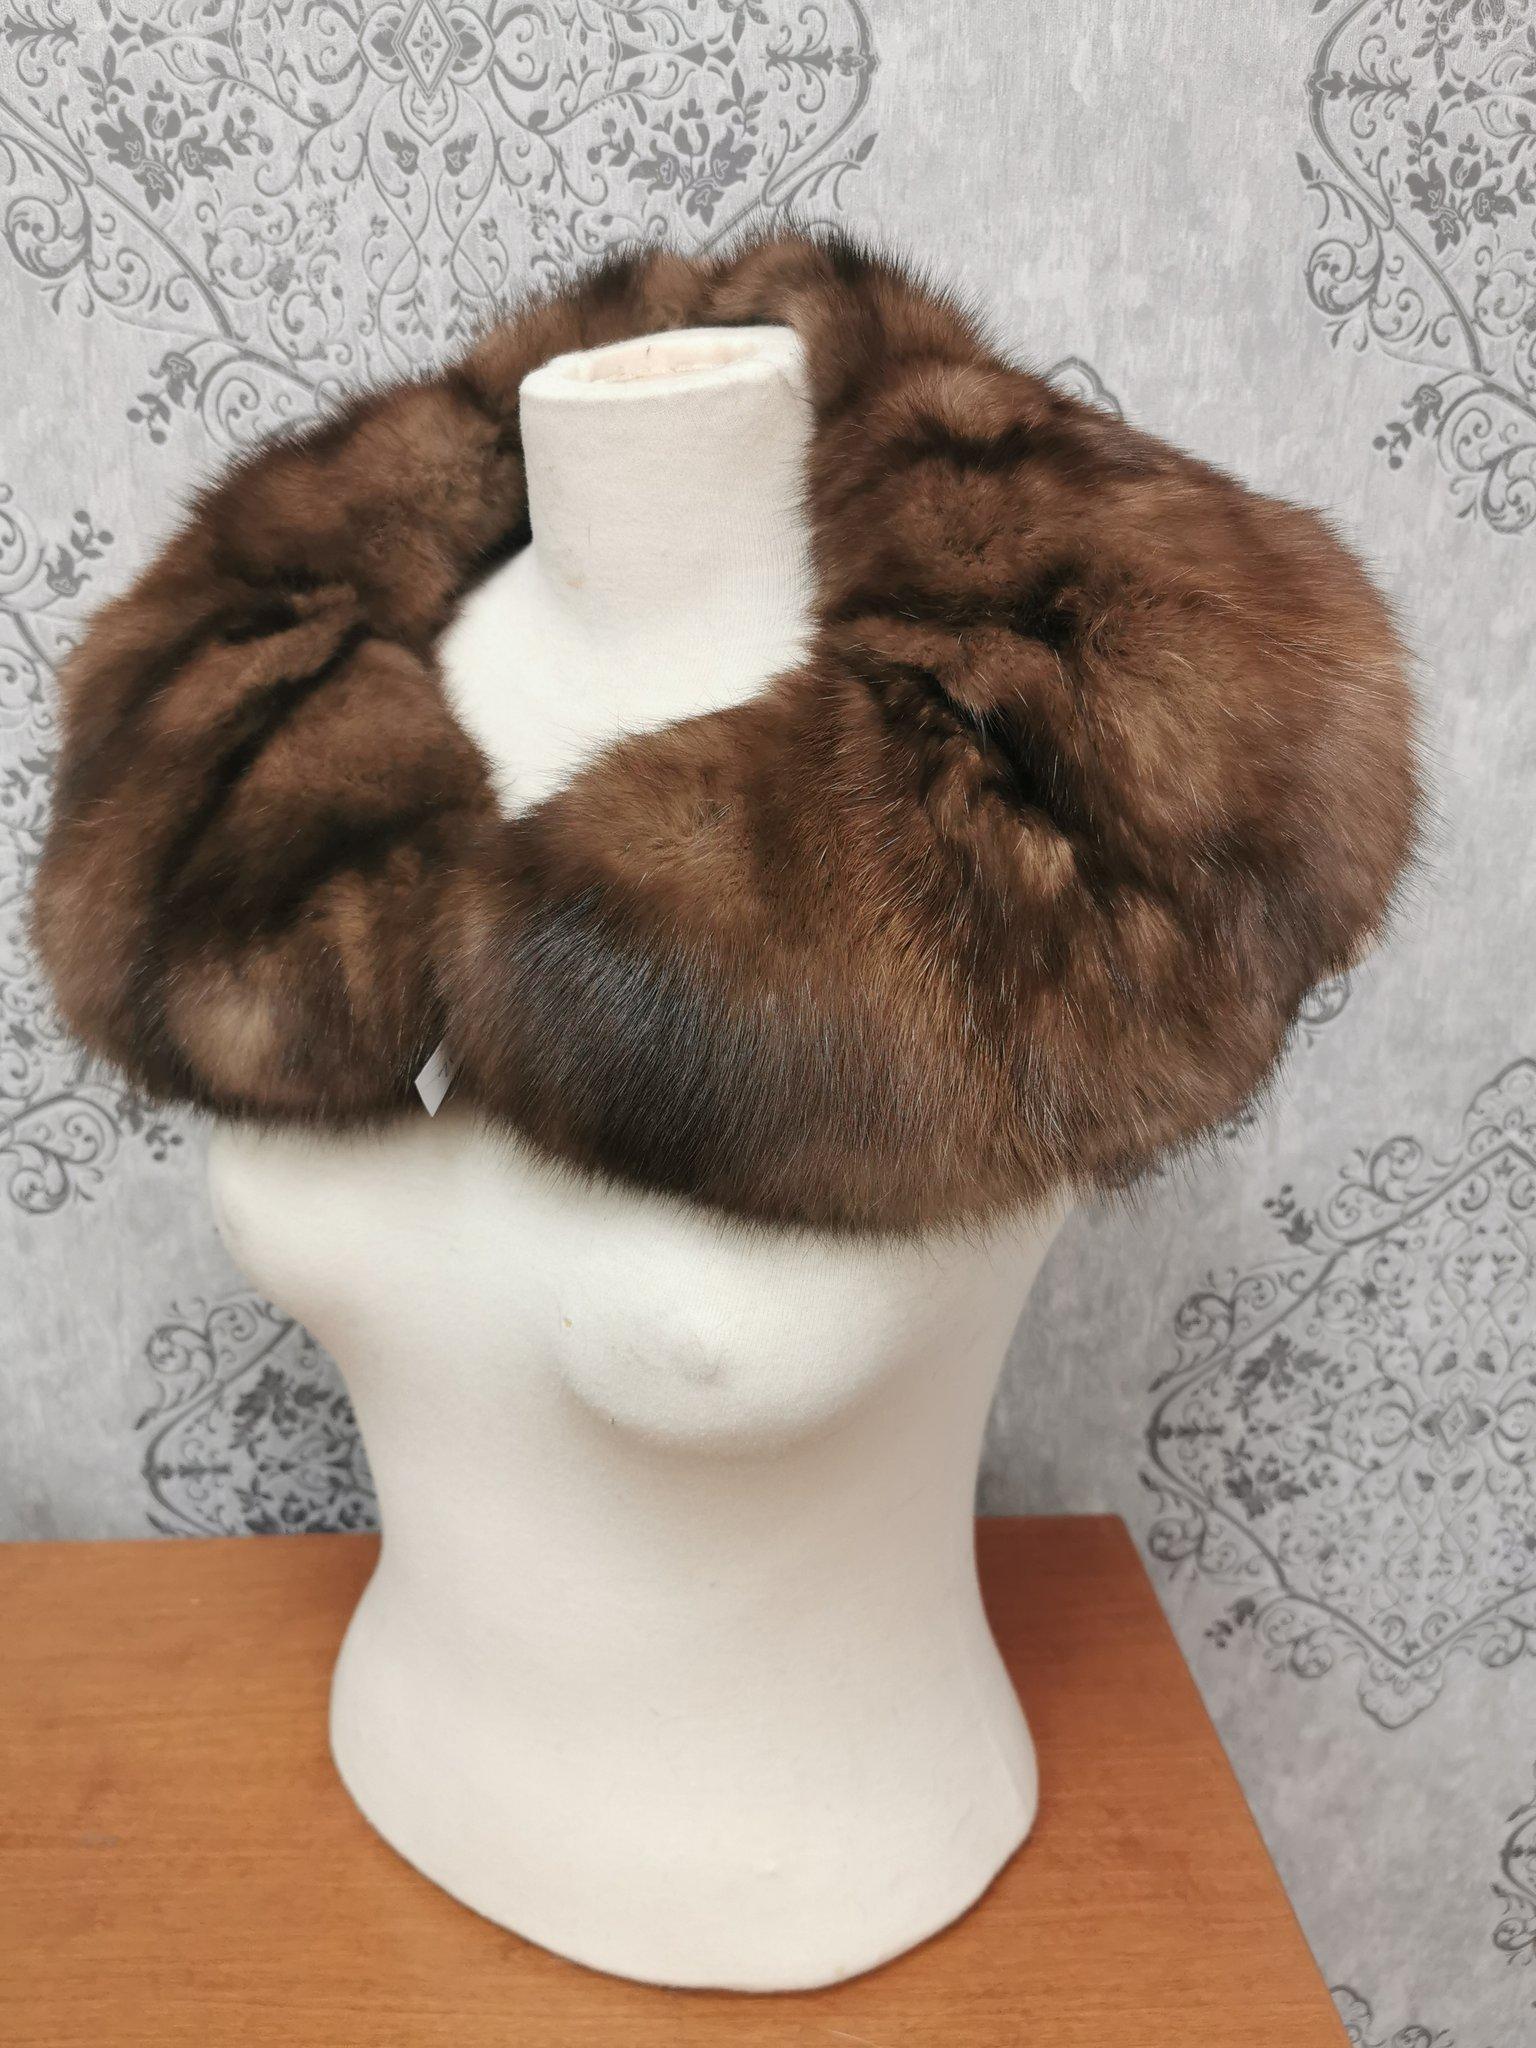 DESCRIPTION : 512 COLLER SABLE FUR SCARF 

supple skins, beautiful fresh fur, nice big full pelts skins in excellent condition.

This item is made in Canada with the best quality skins.

Stock number : 512

MADE IN CANADA

 ******All our fur coats